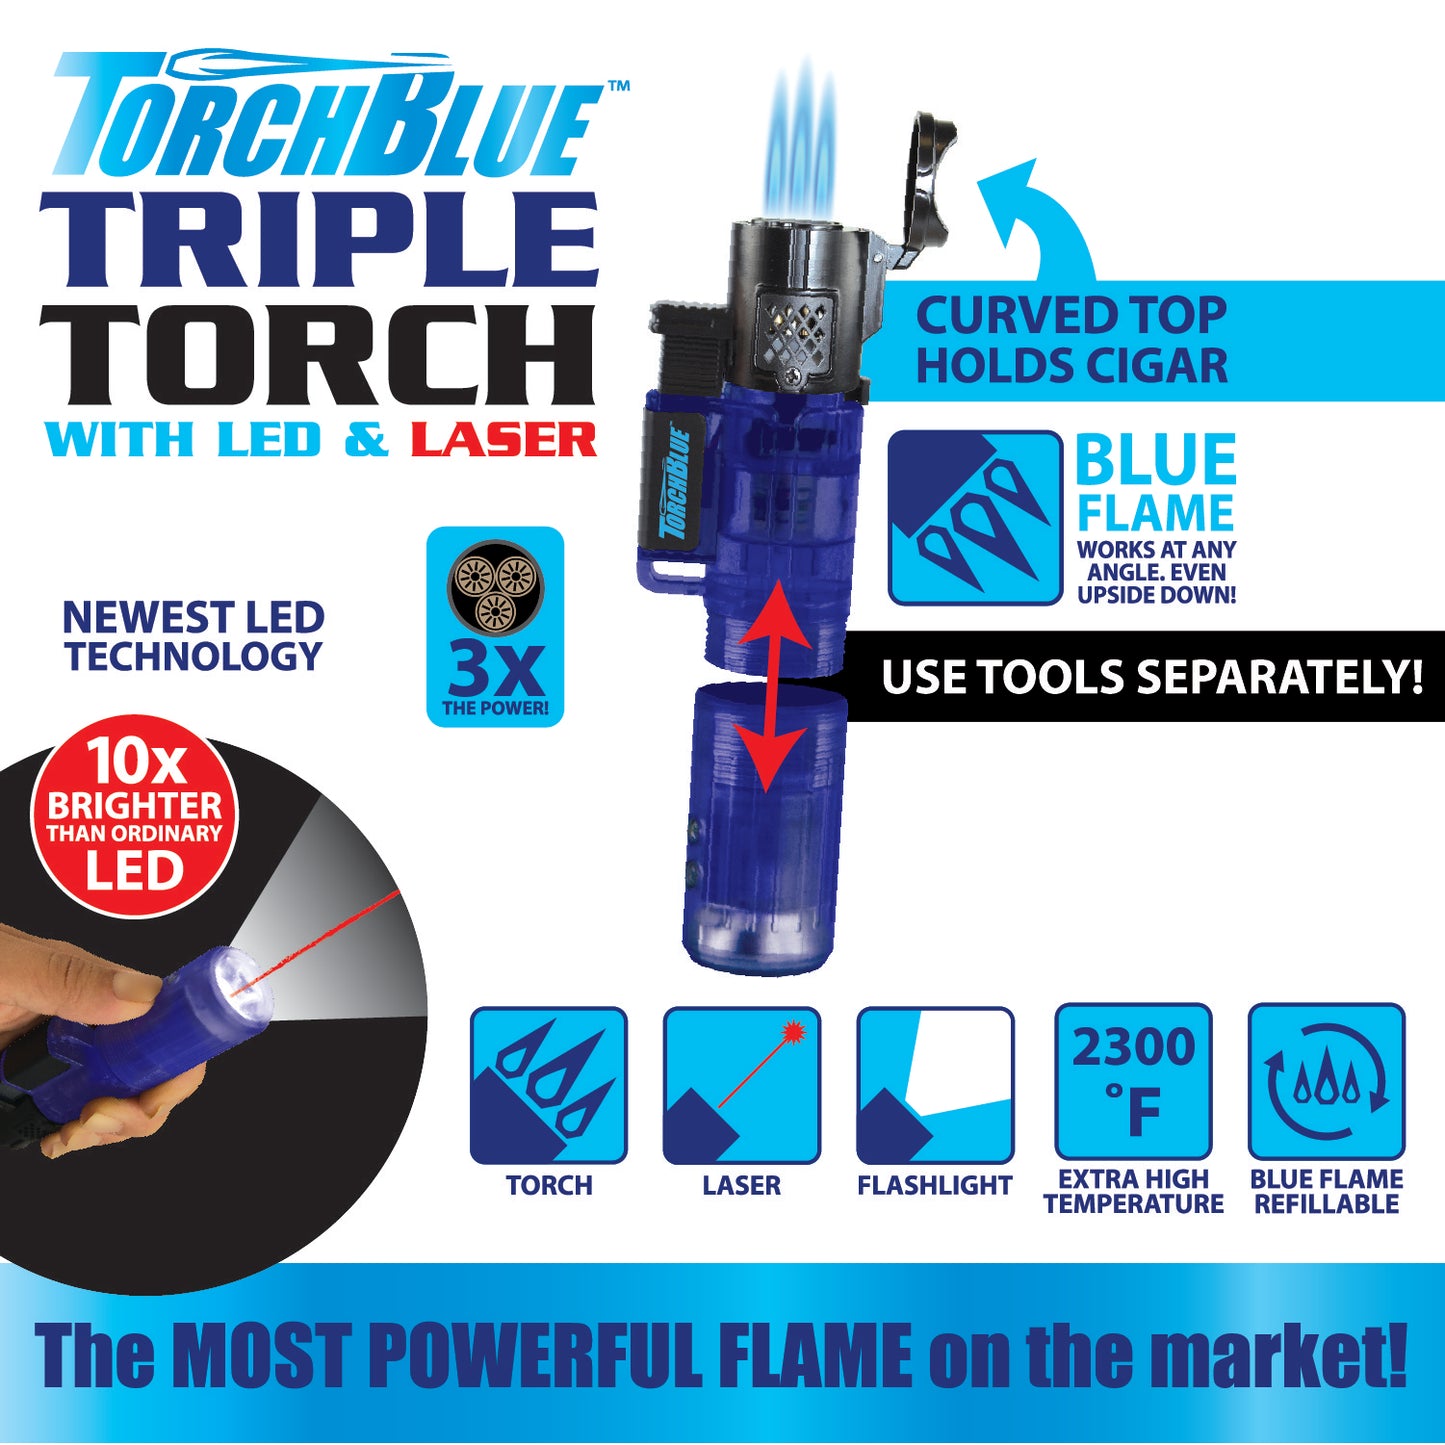 ITEM NUMBER 021802L TB TRIPLE TORCH LED - STORE SURPLUS NO DISPLAY 12 PIECES PER PACK